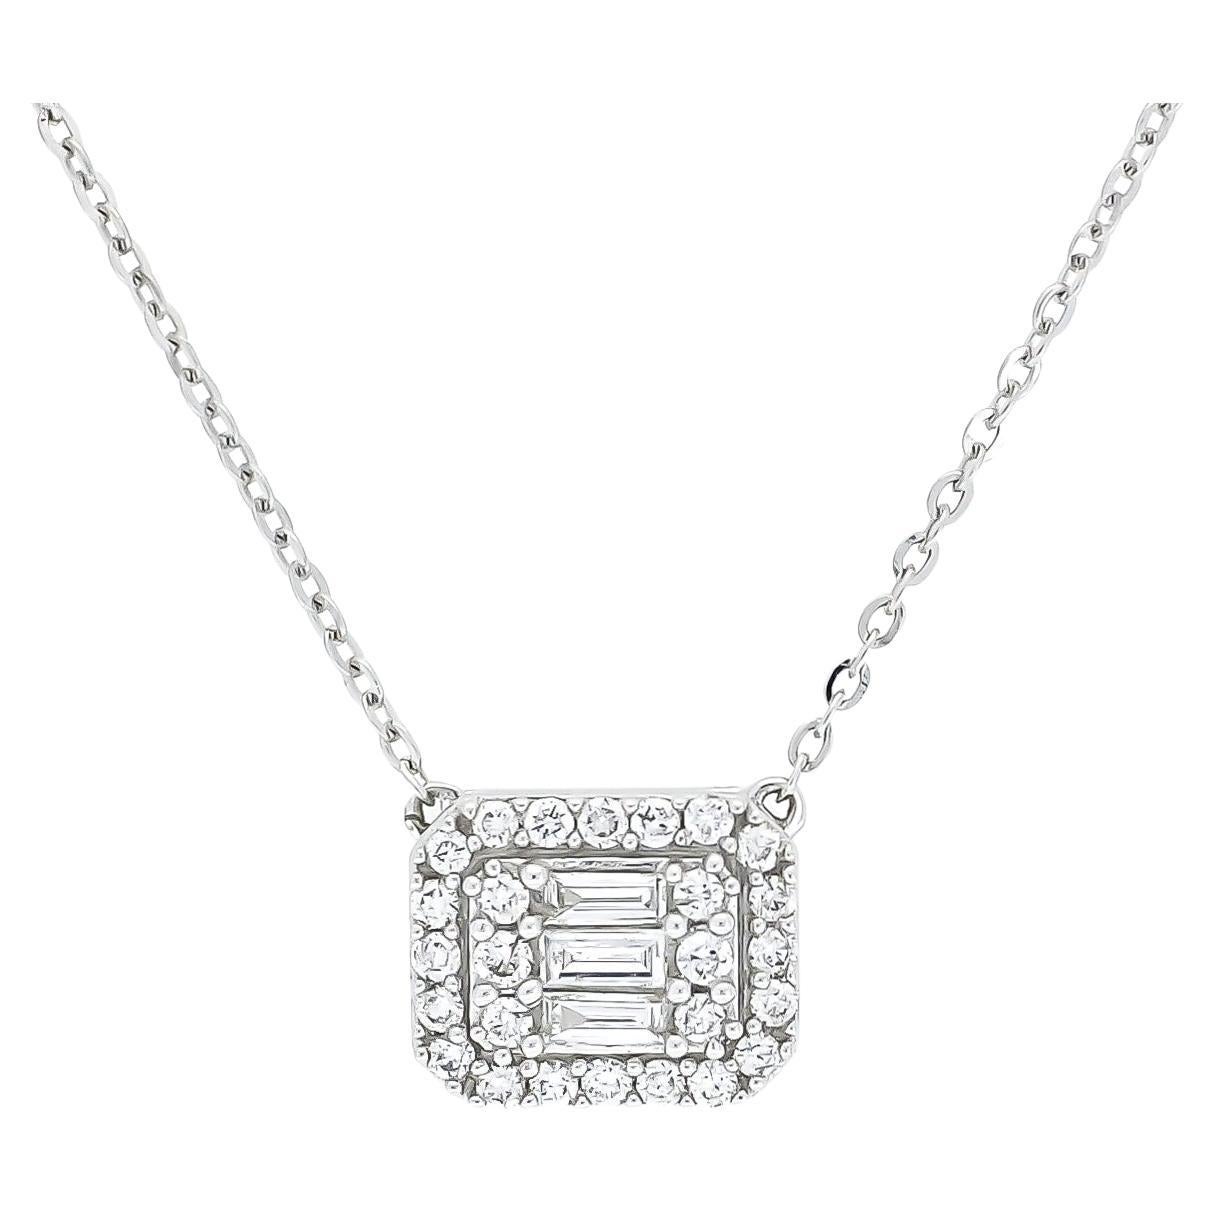 Natural Diamond Pendant 0.25 CT 18KT White Gold Cluster Halo Chain Necklace For Sale